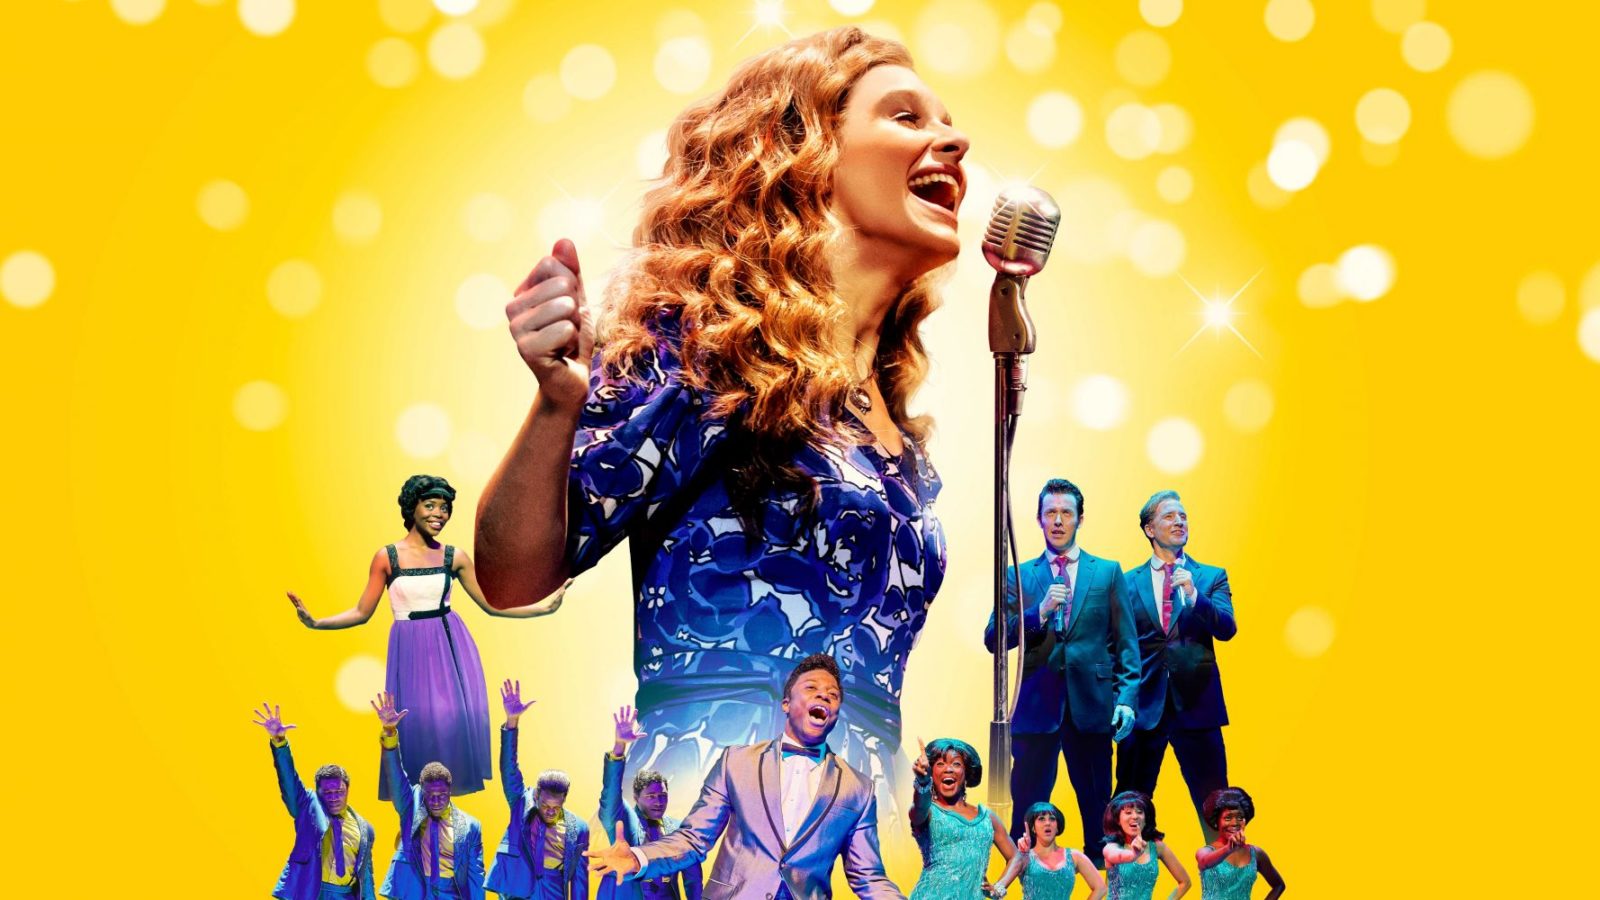 Beautiful: The Carole King Musical | Jay and Susie Gogue